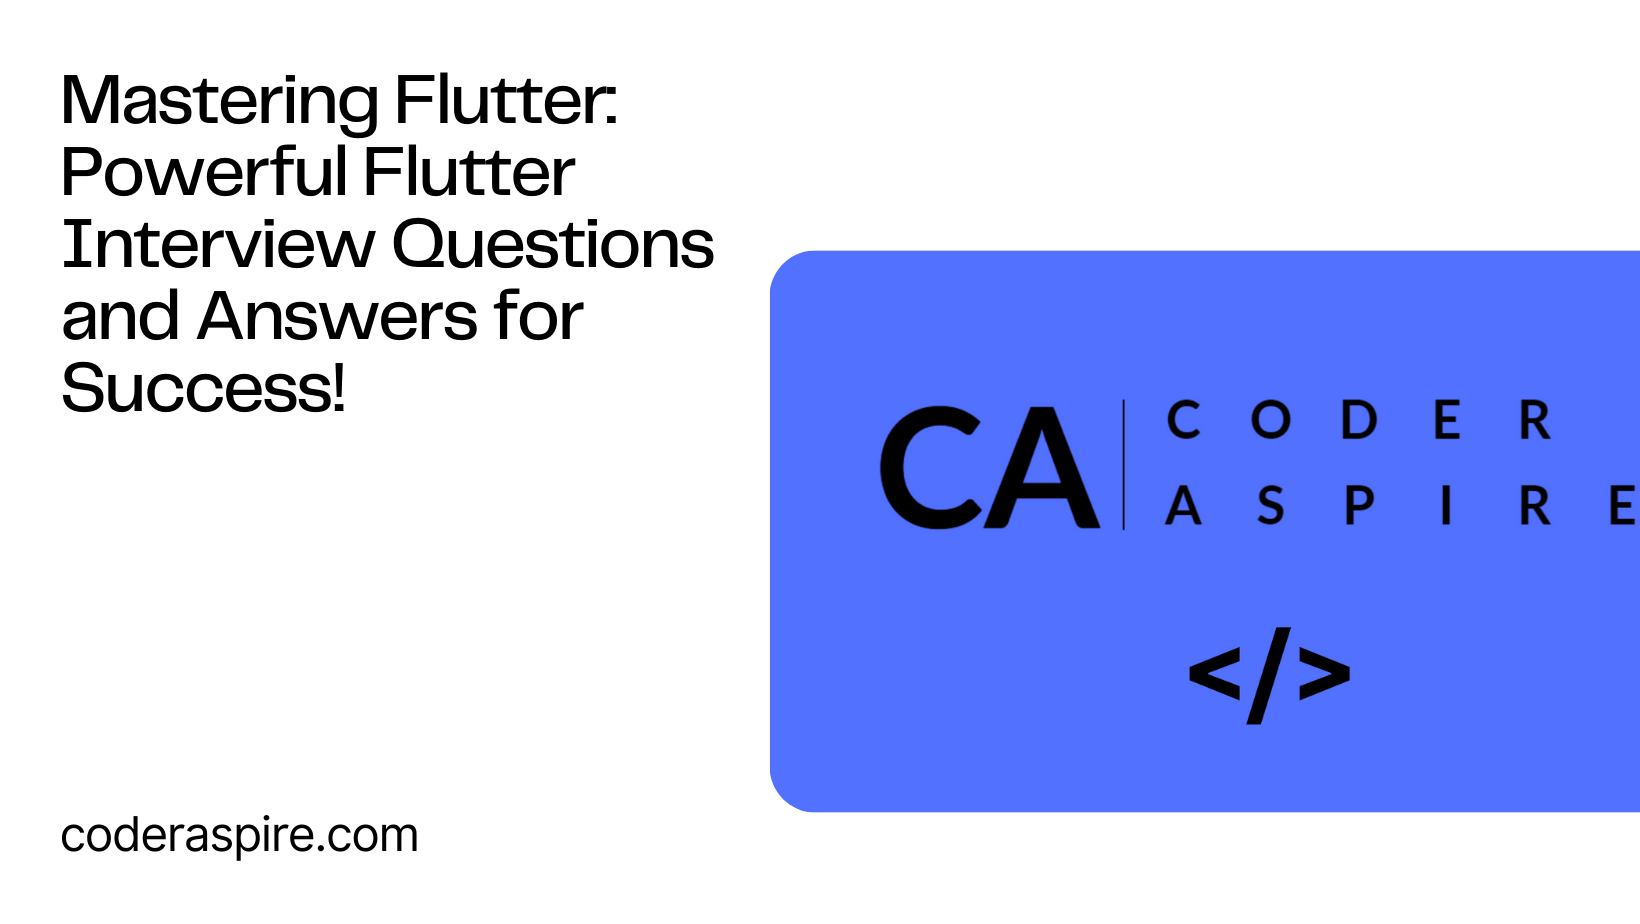 Mastering Flutter: Powerful Flutter Interview Questions and Answers for Success!